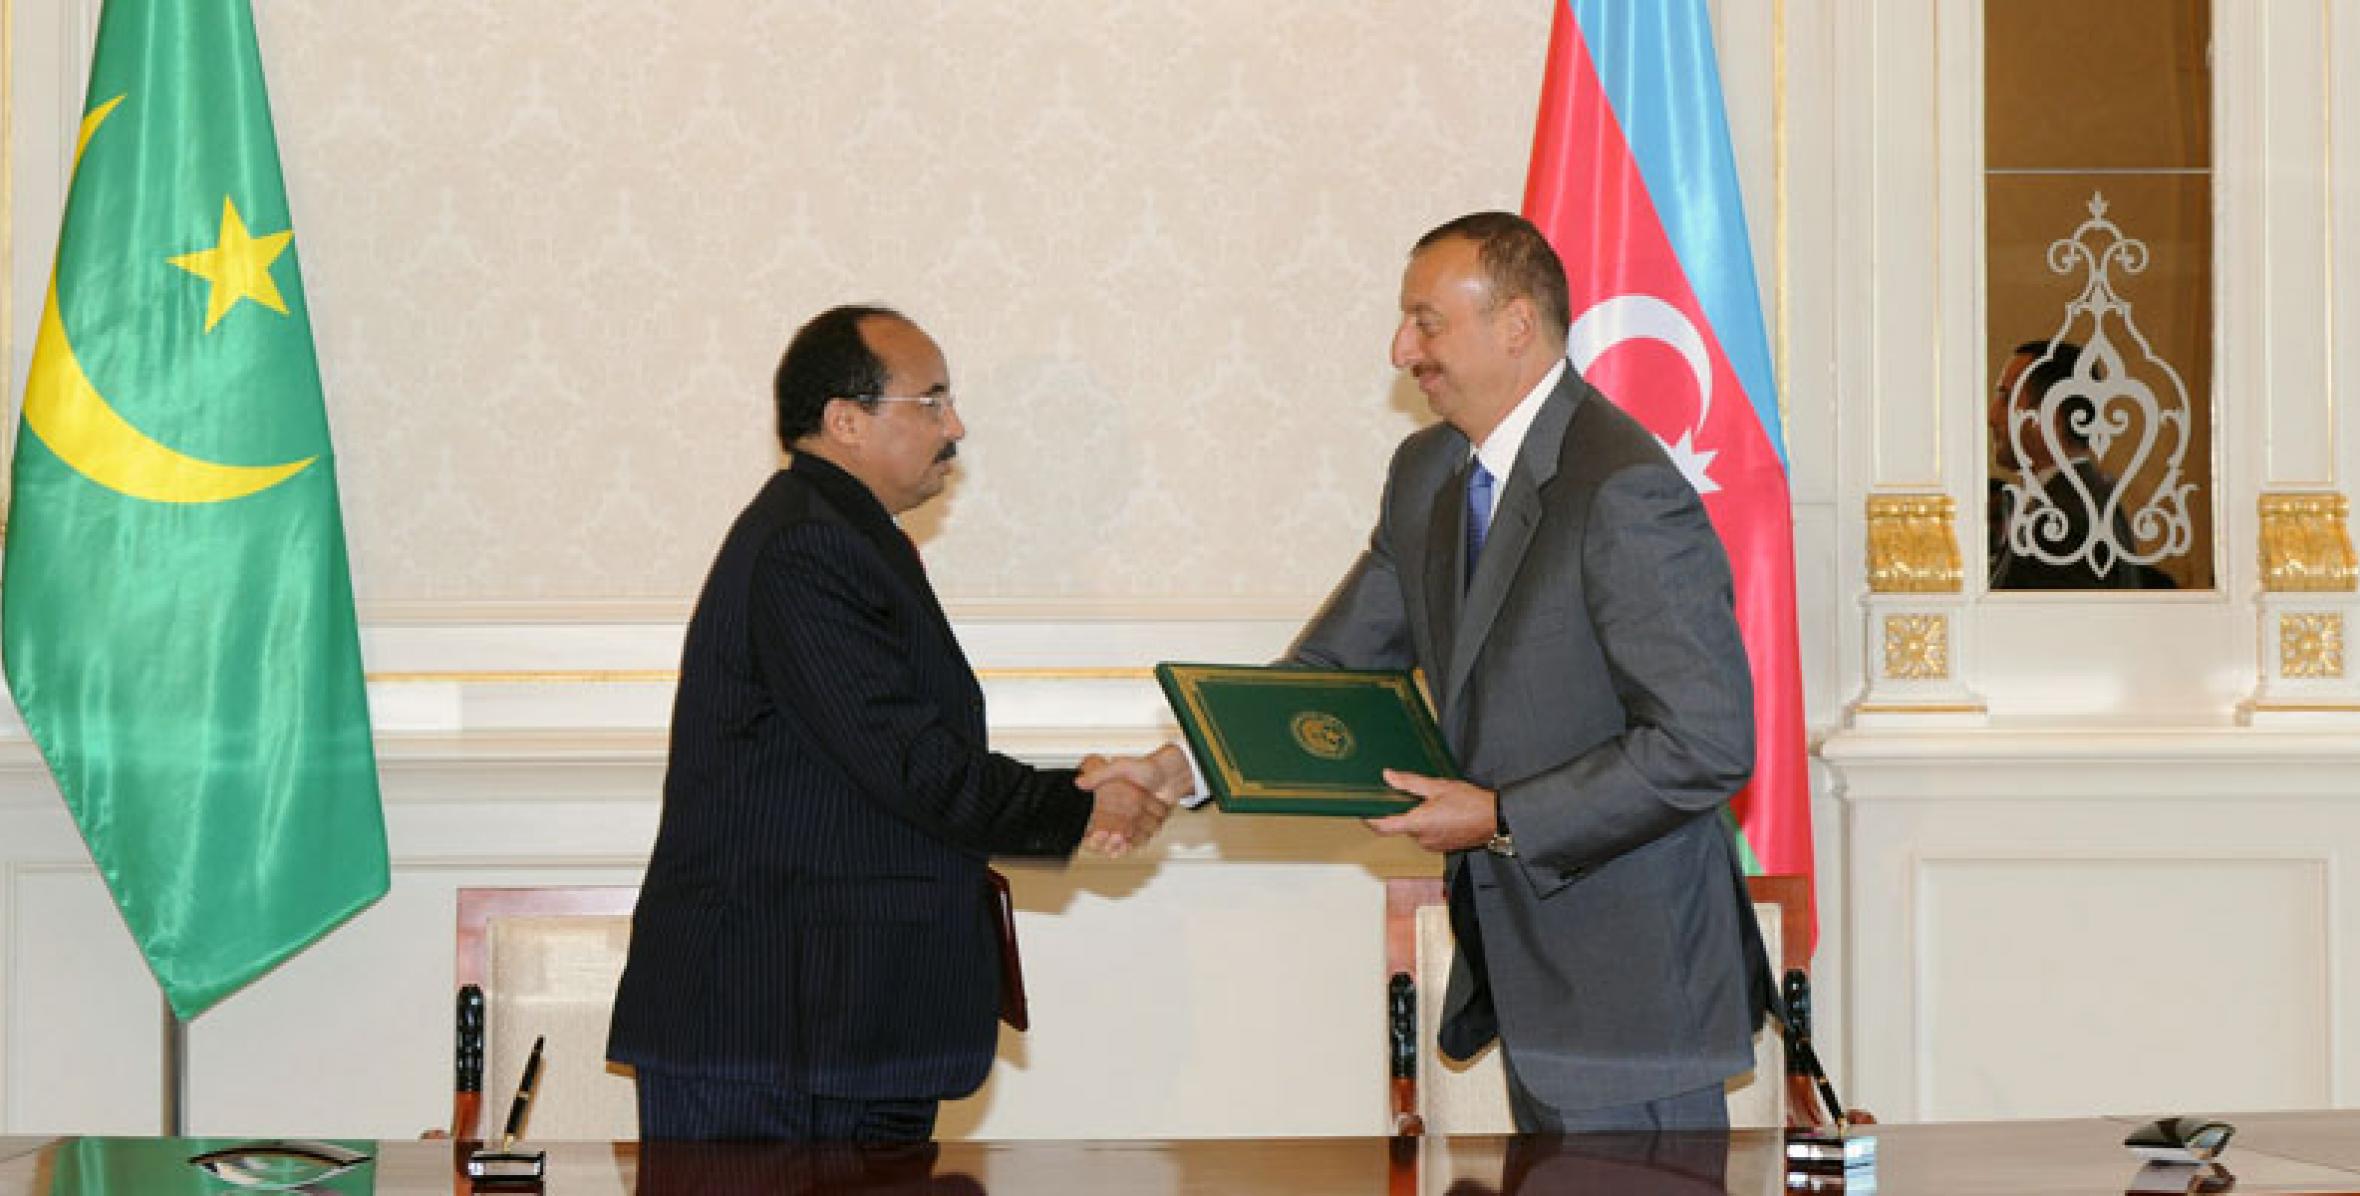 A document signing ceremony took place between Azerbaijan and Mauritania